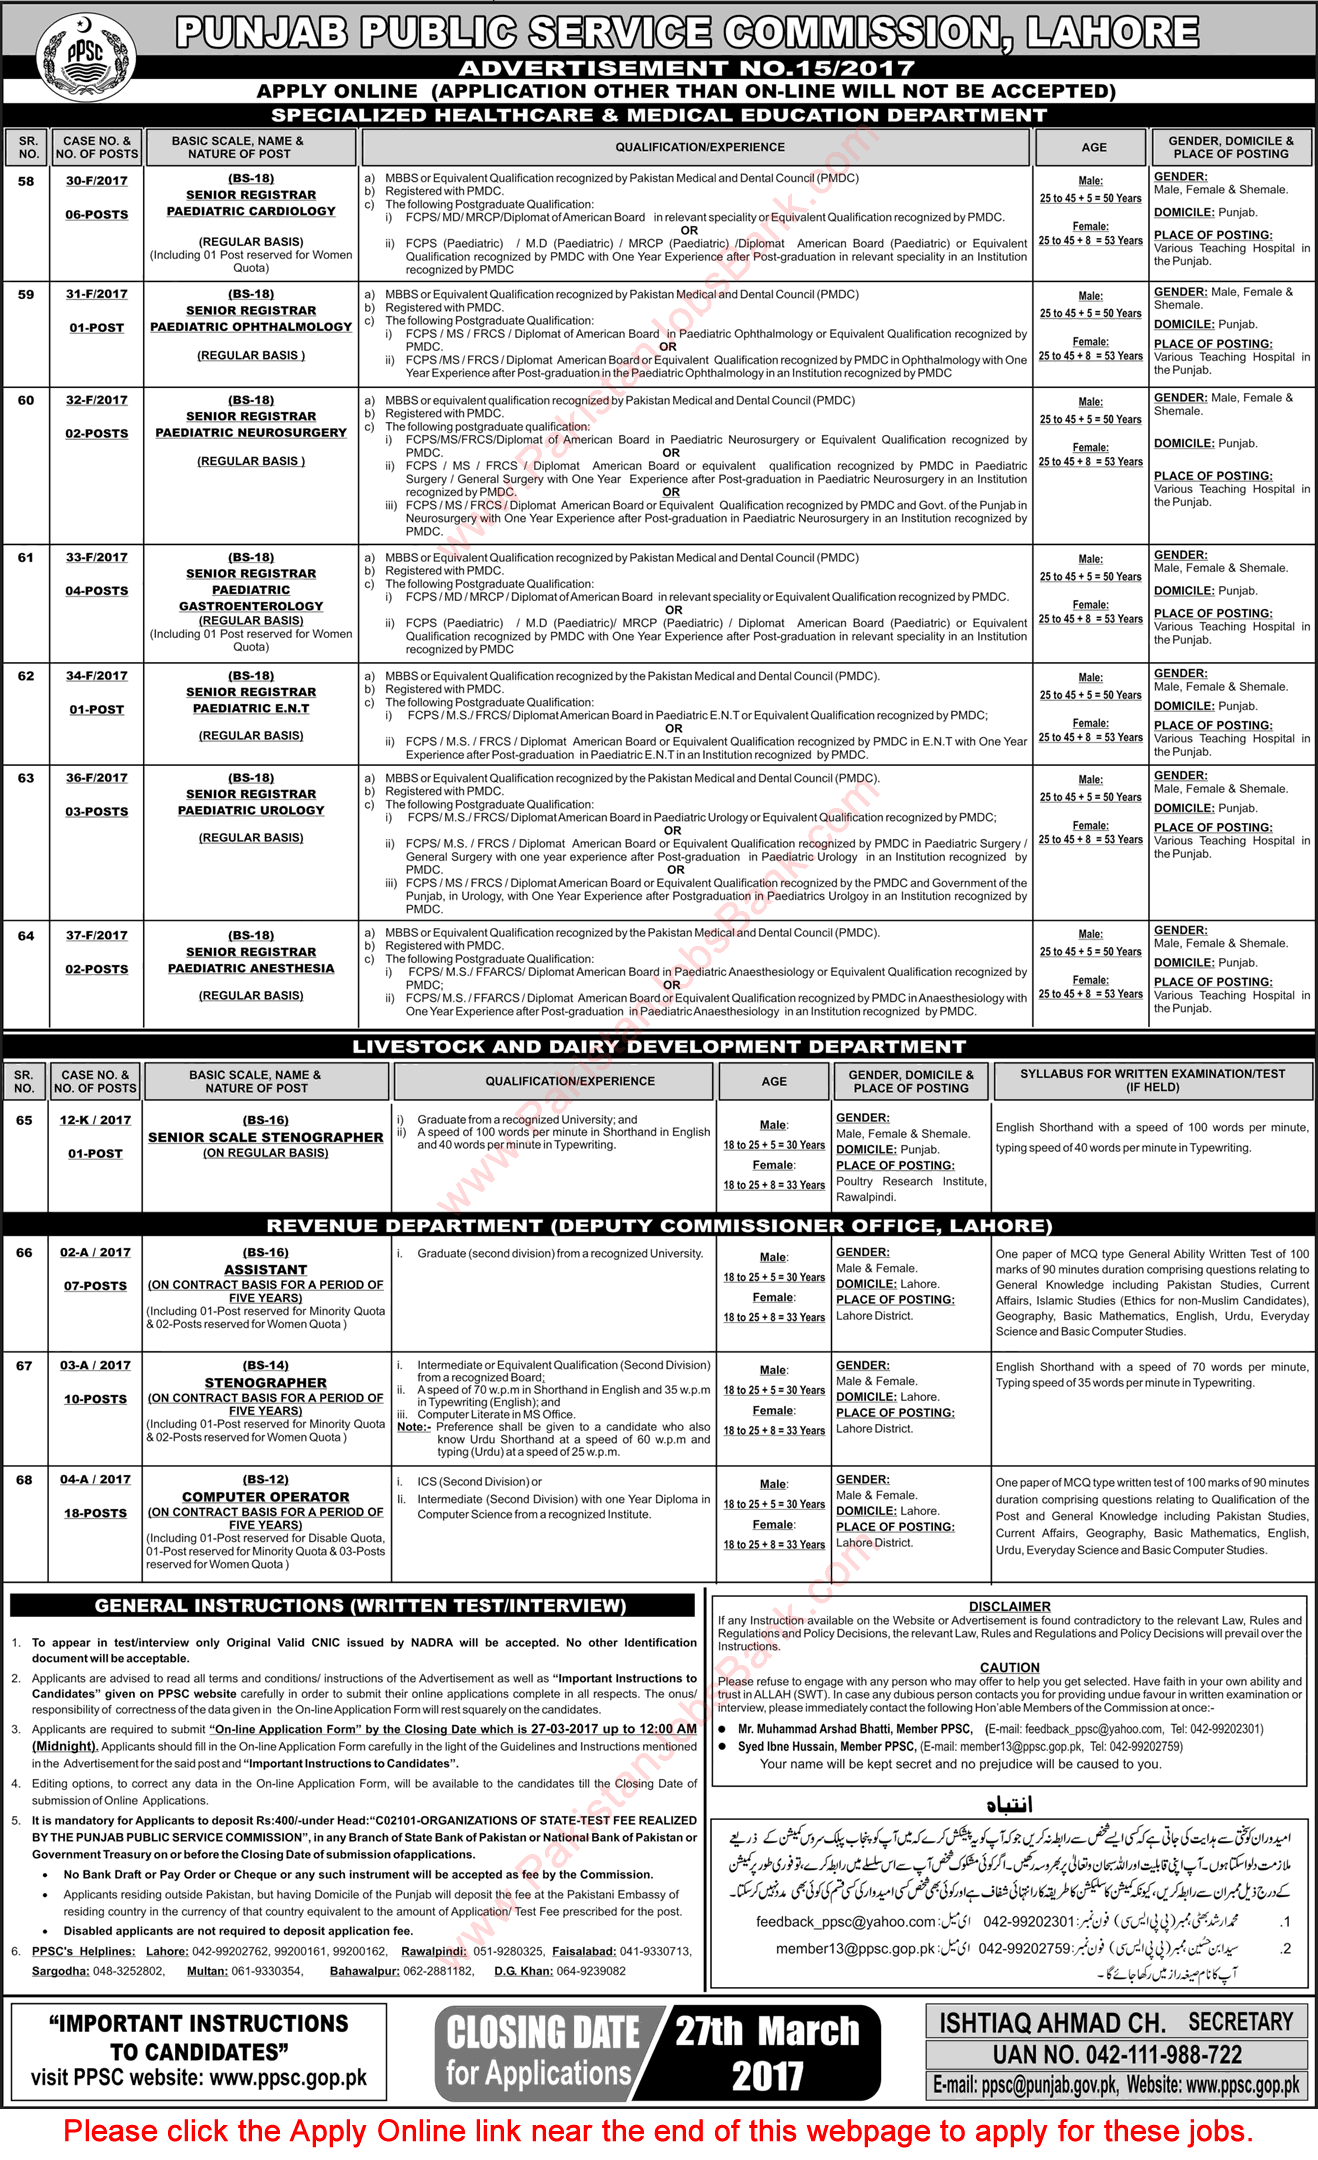 PPSC Jobs March 2017 Consolidated Advertisement No 15/2017 Apply Online Latest